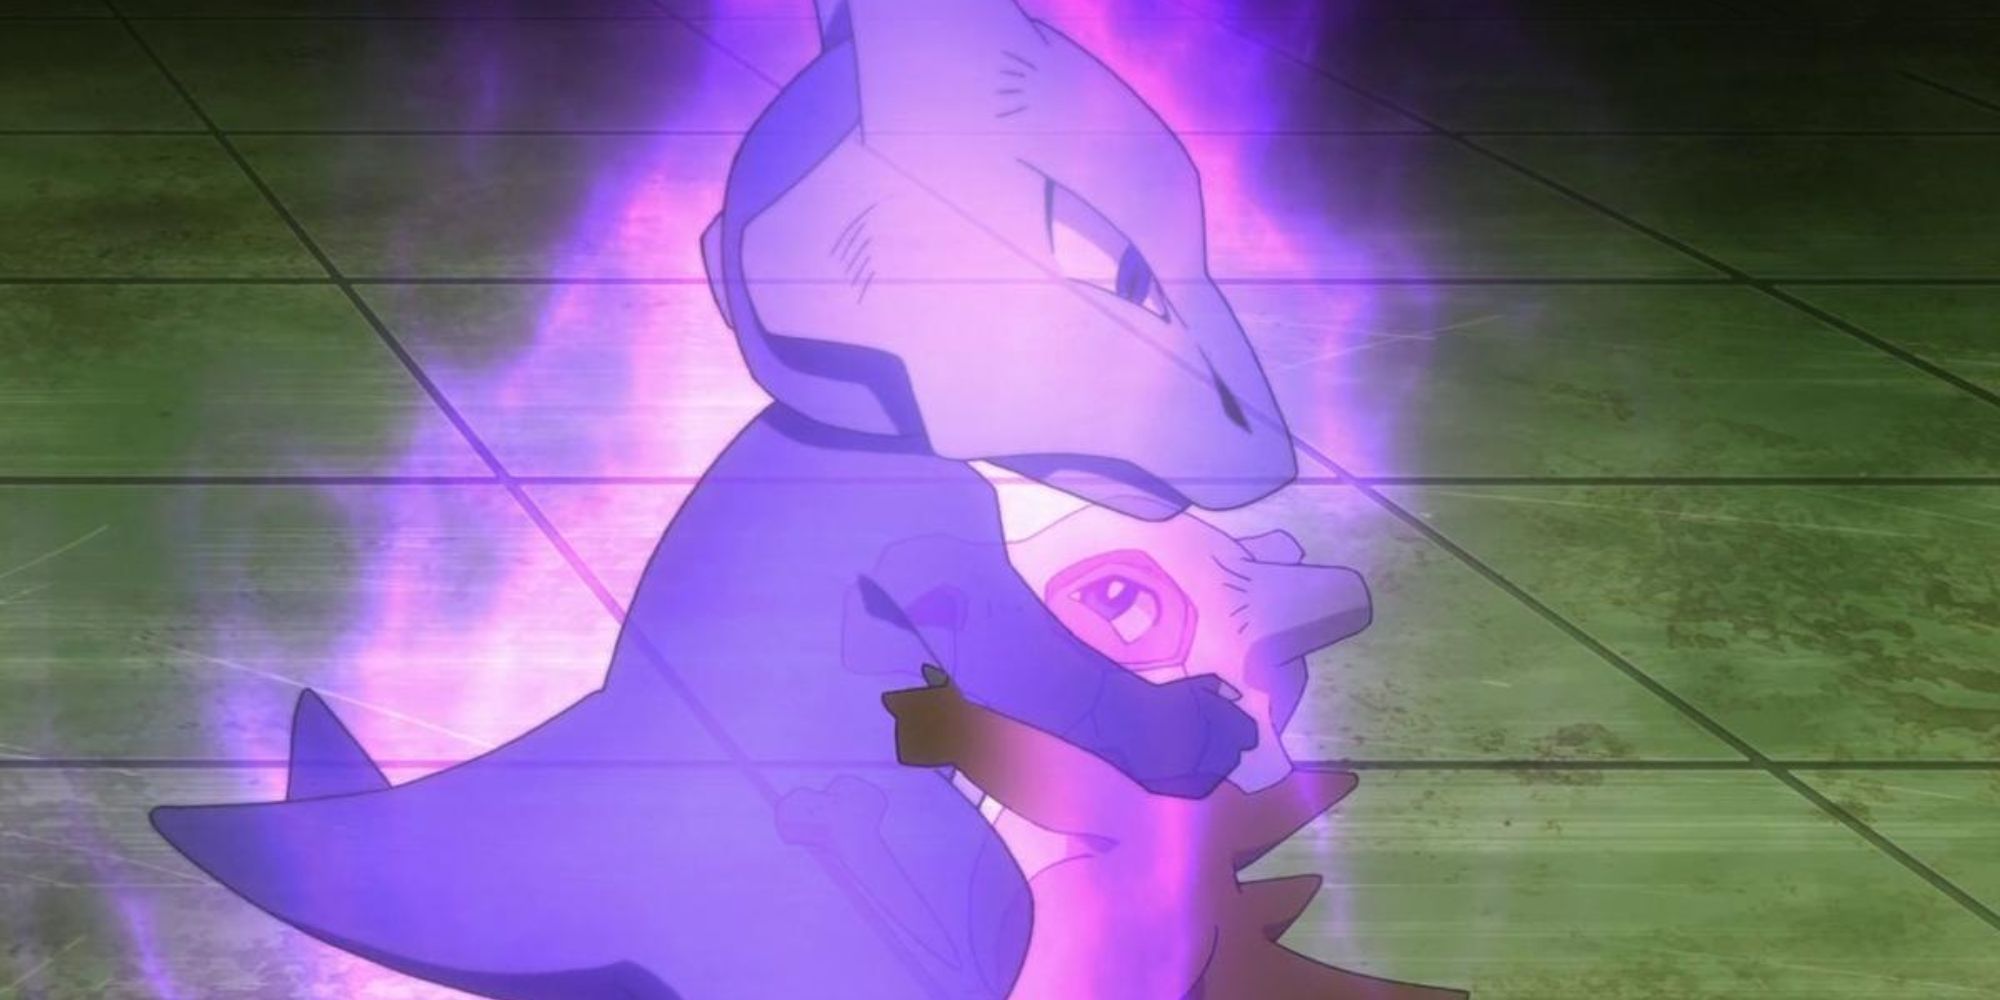 Still from the Pokemon animated series of Cubone hugging its ghostly mother Marowak,